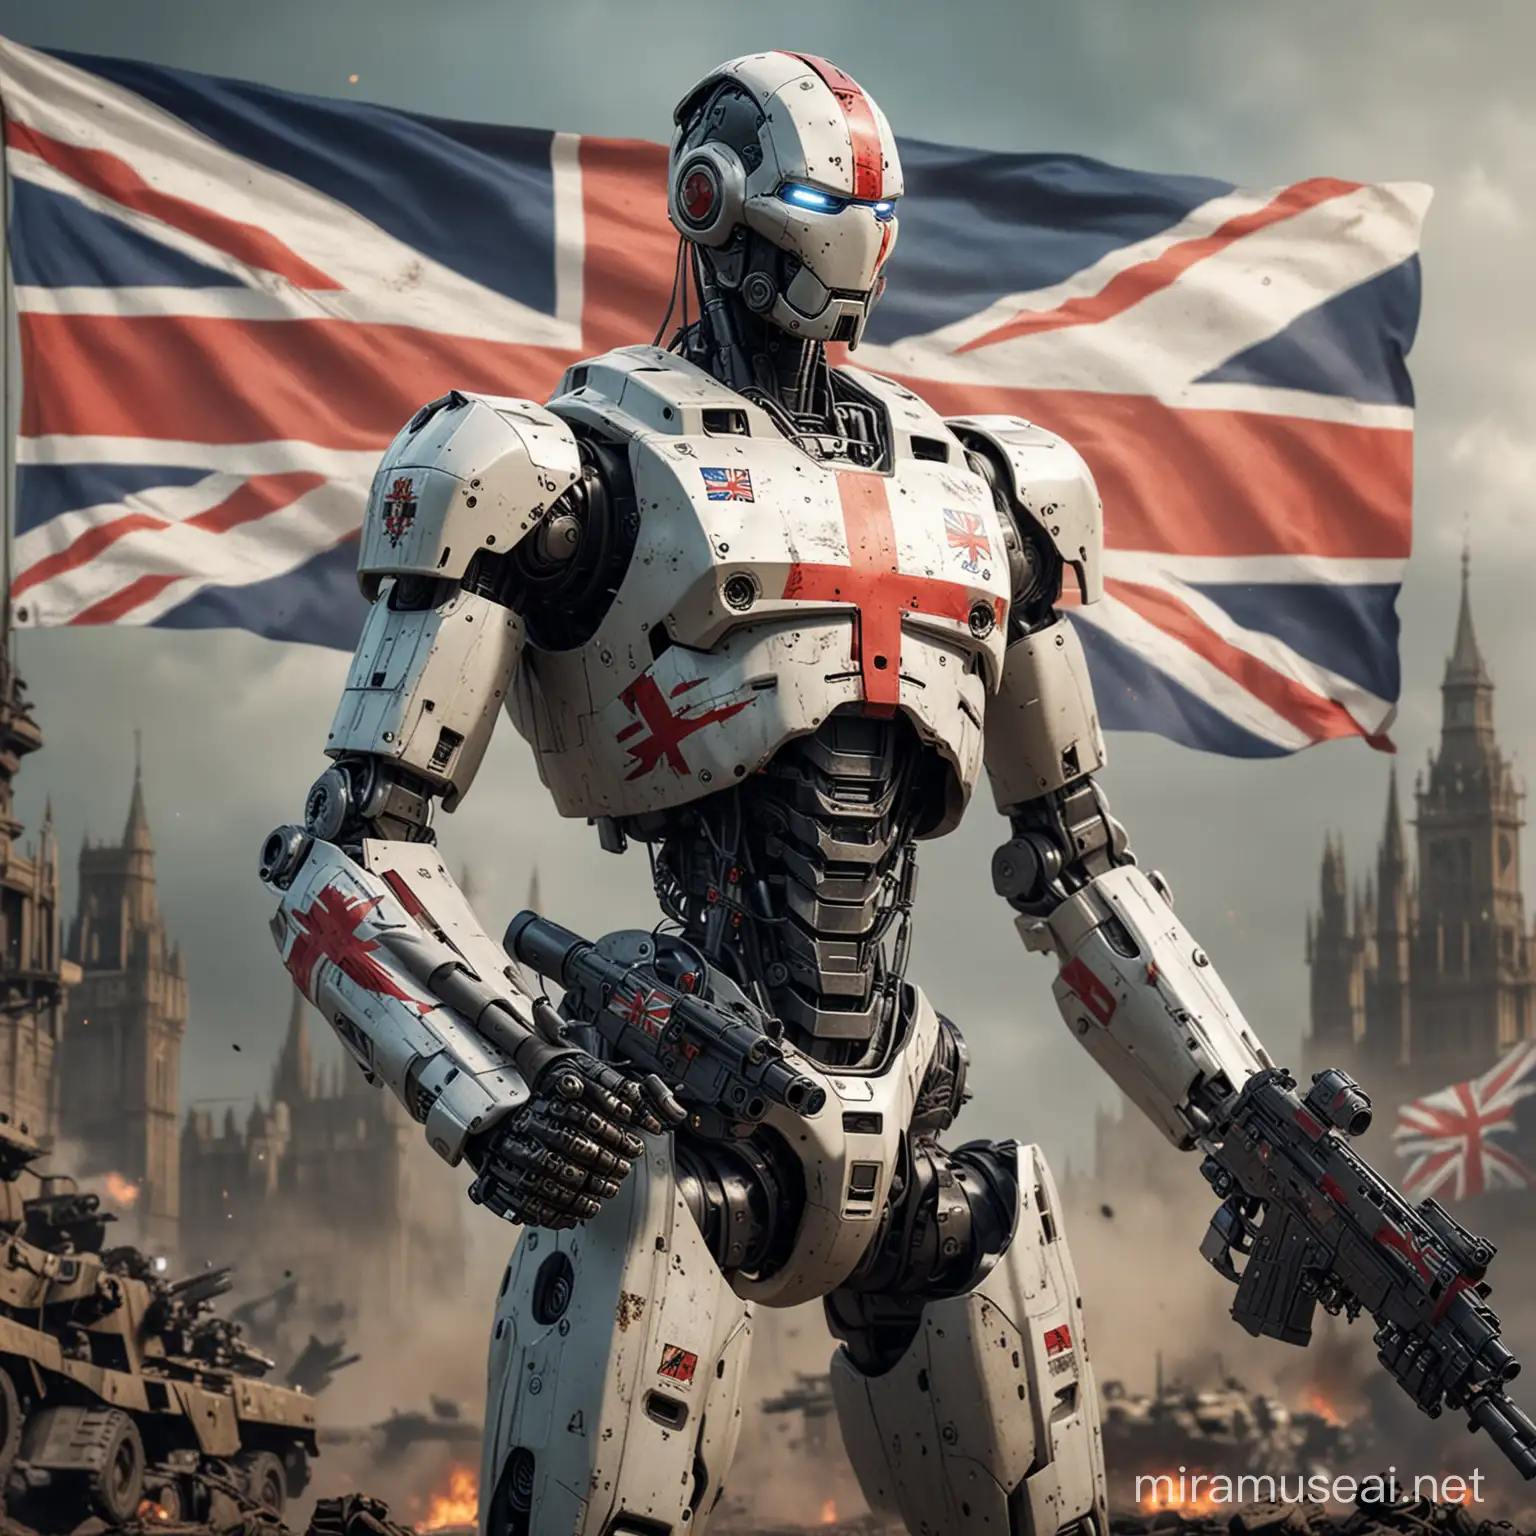 Robotic Representation of England Tough and Aesthetic Mech with Great Britain Flag in War Background